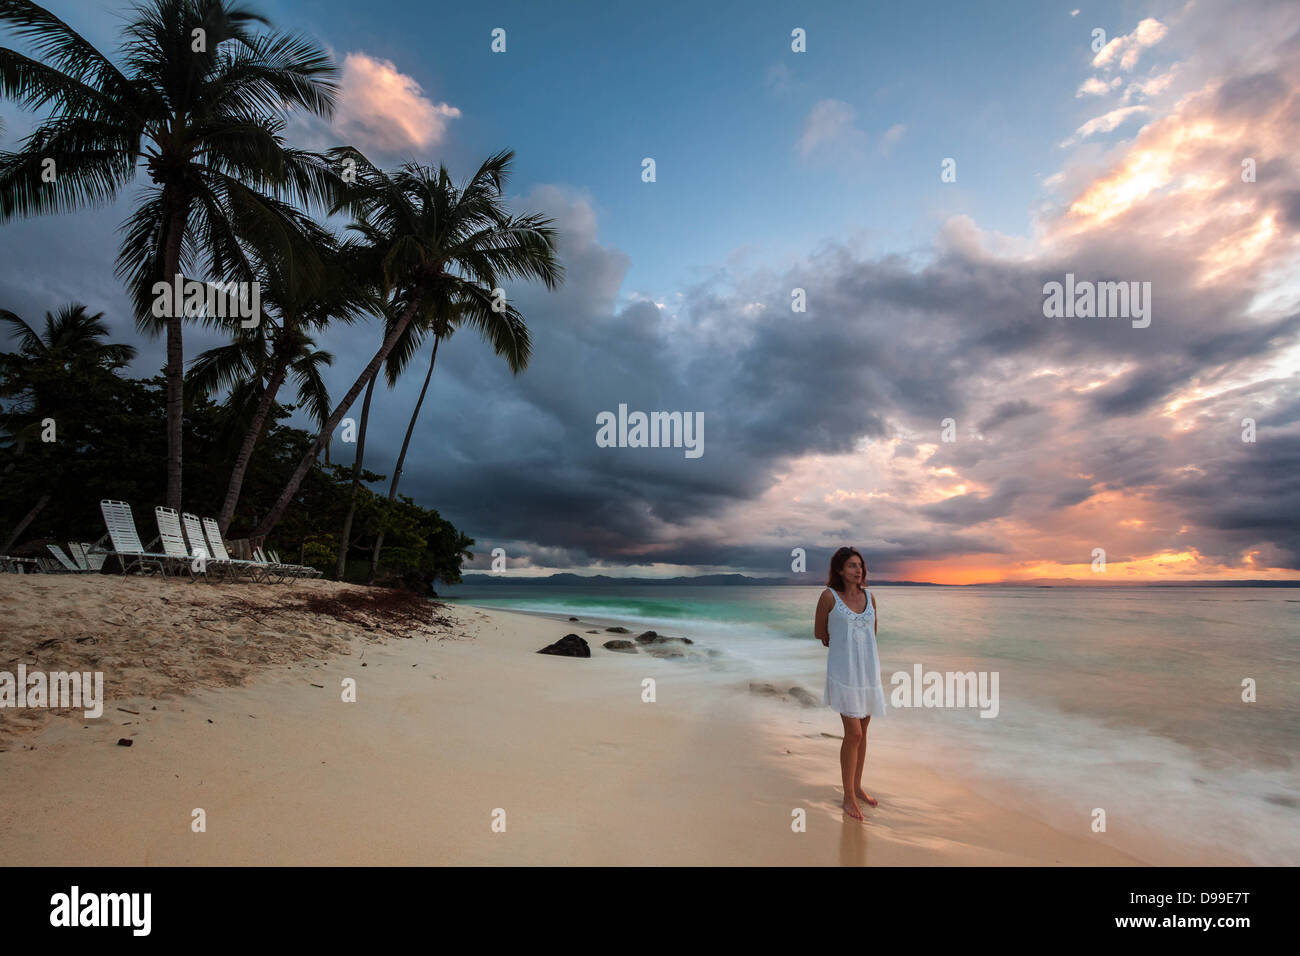 Nostalgic woman in a white dress, barefoot on a tropical beach at sunset Stock Photo